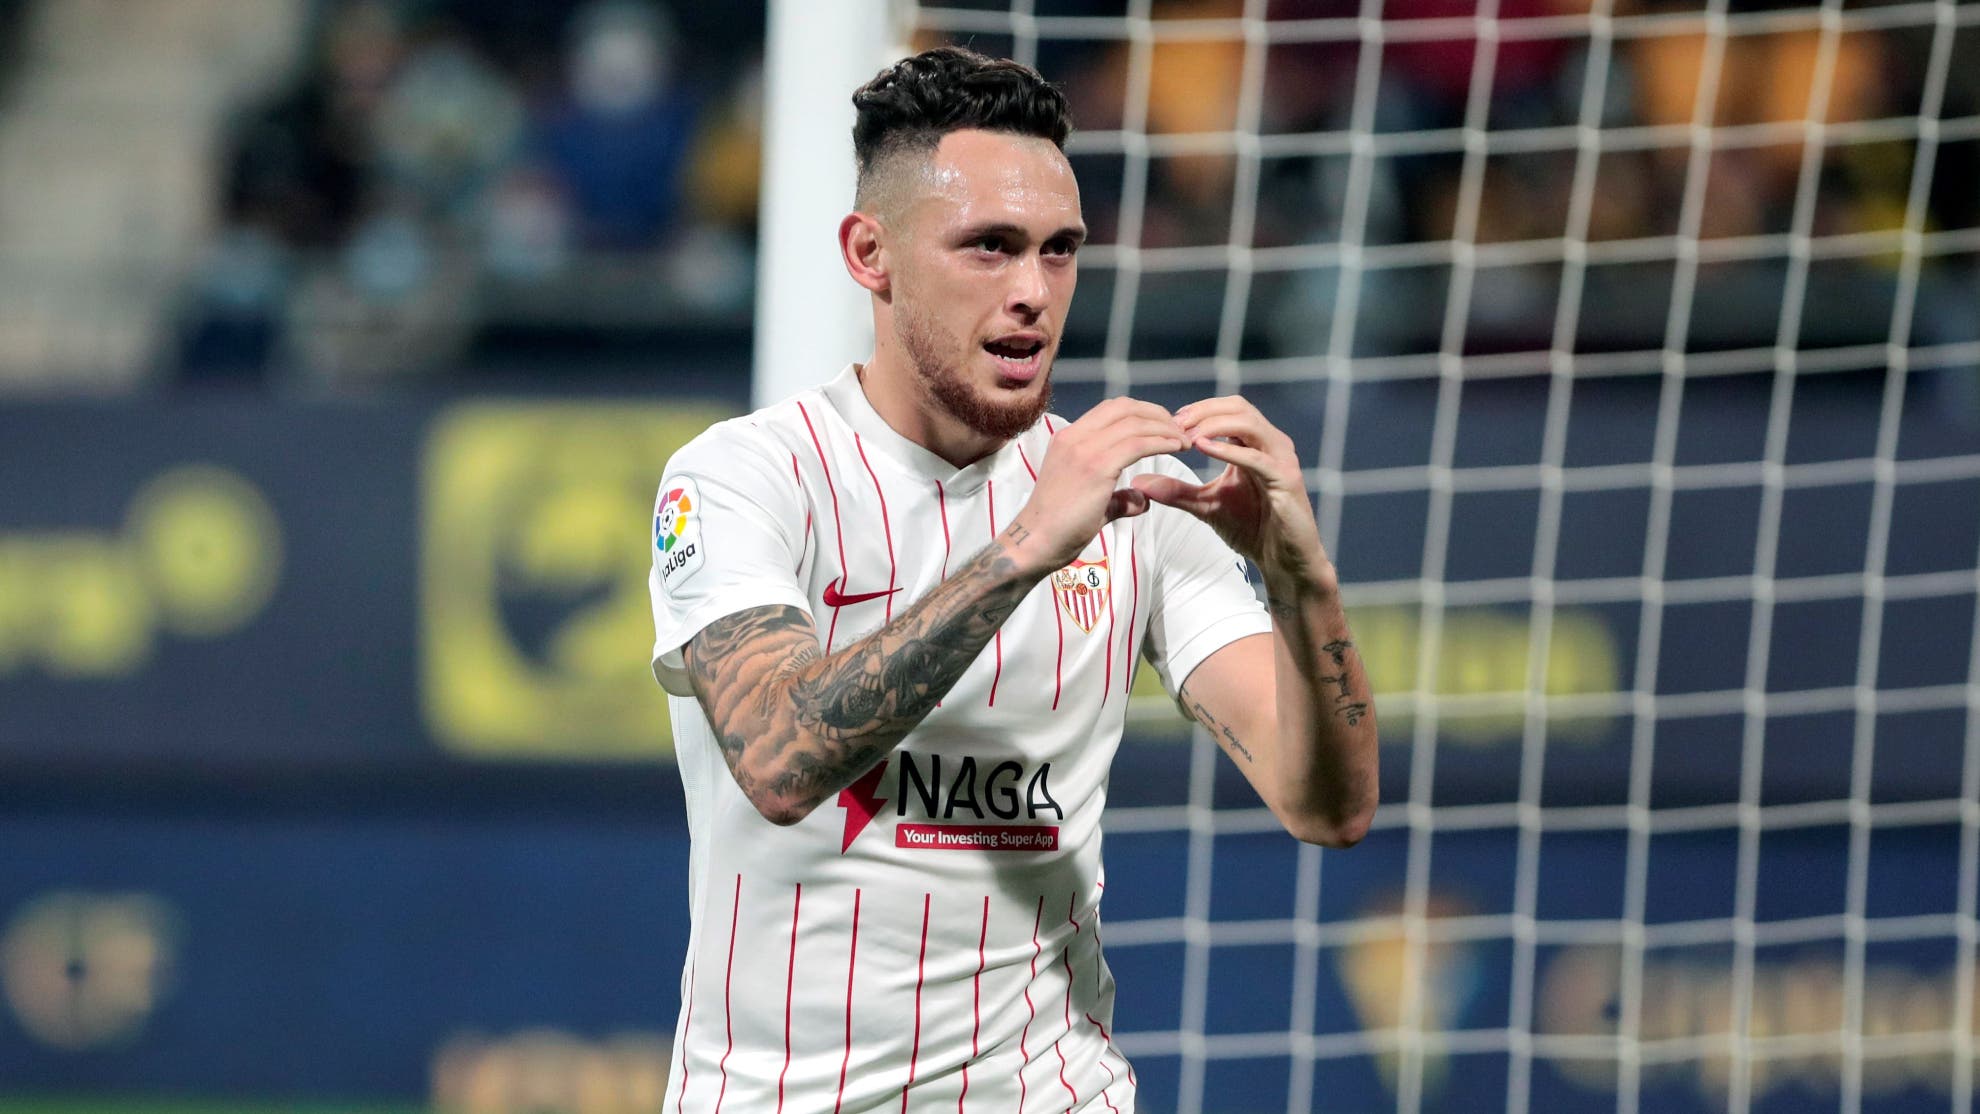 Surprise goal from Sevilla FC to sell Ocampos
